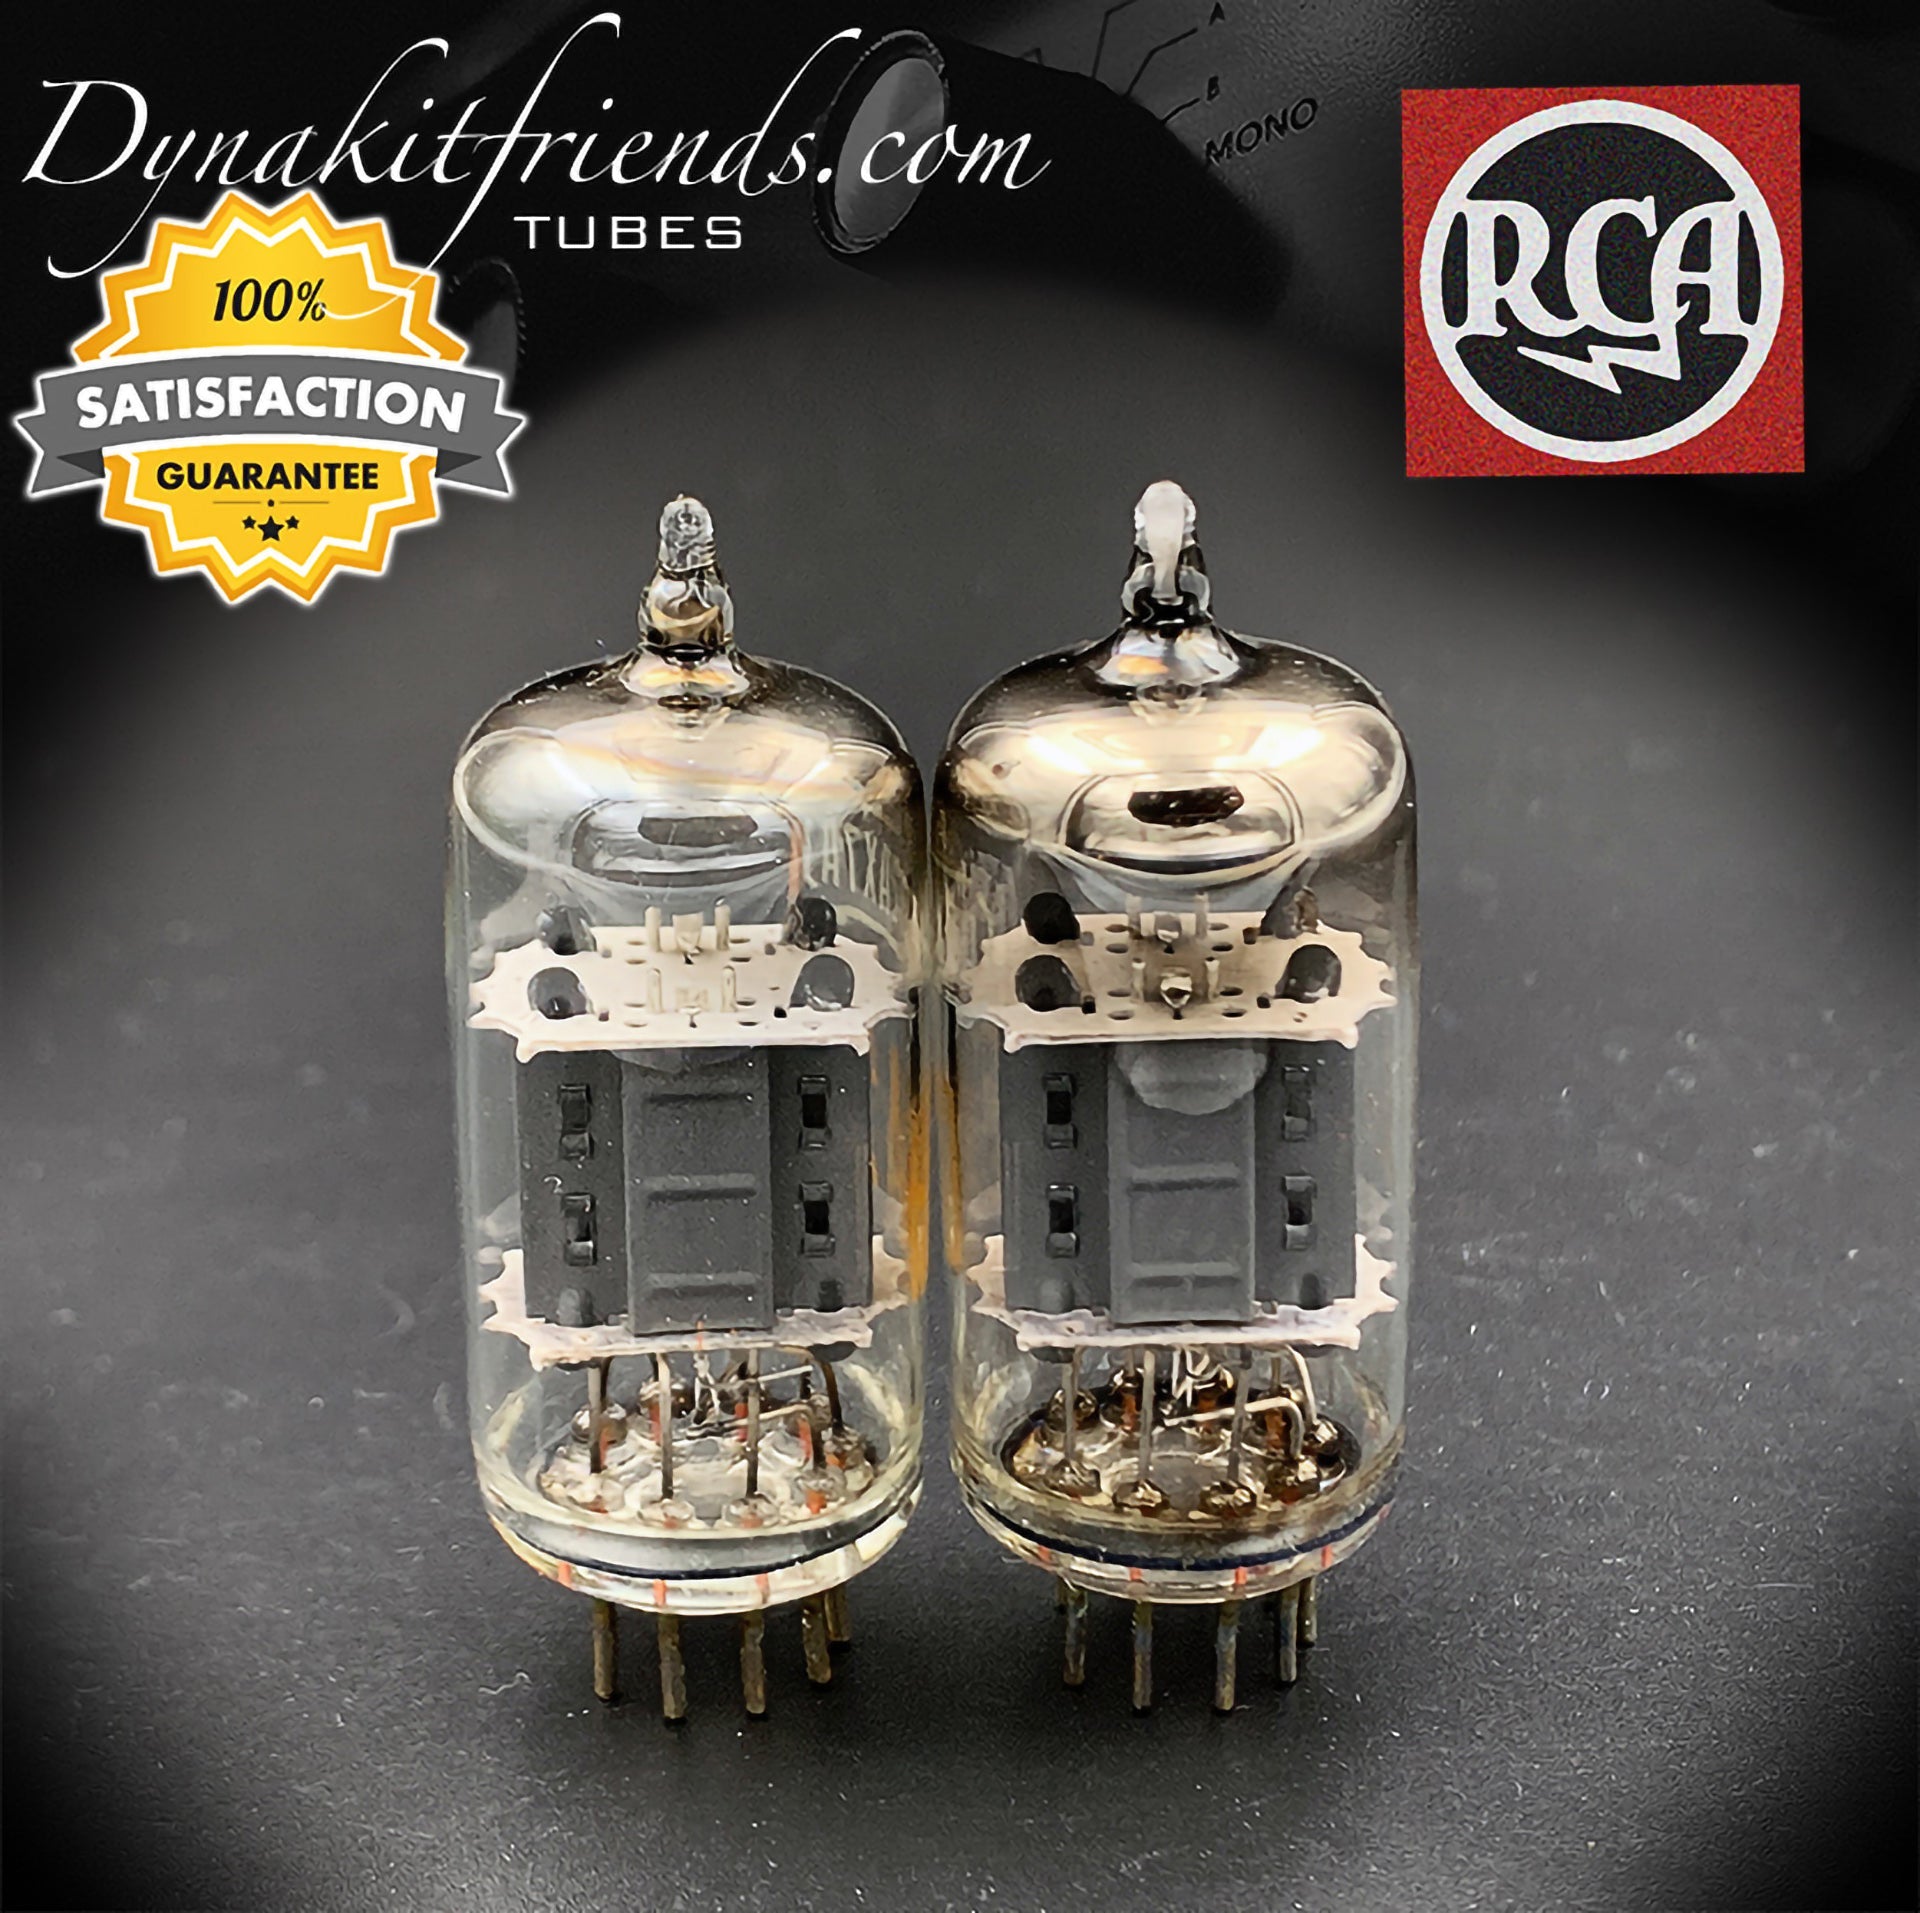 12AX7 ( ECC83 ) RCA Short Plates O Getter Matched Tubes MADE IN USA - Vacuum Tubes Treasures